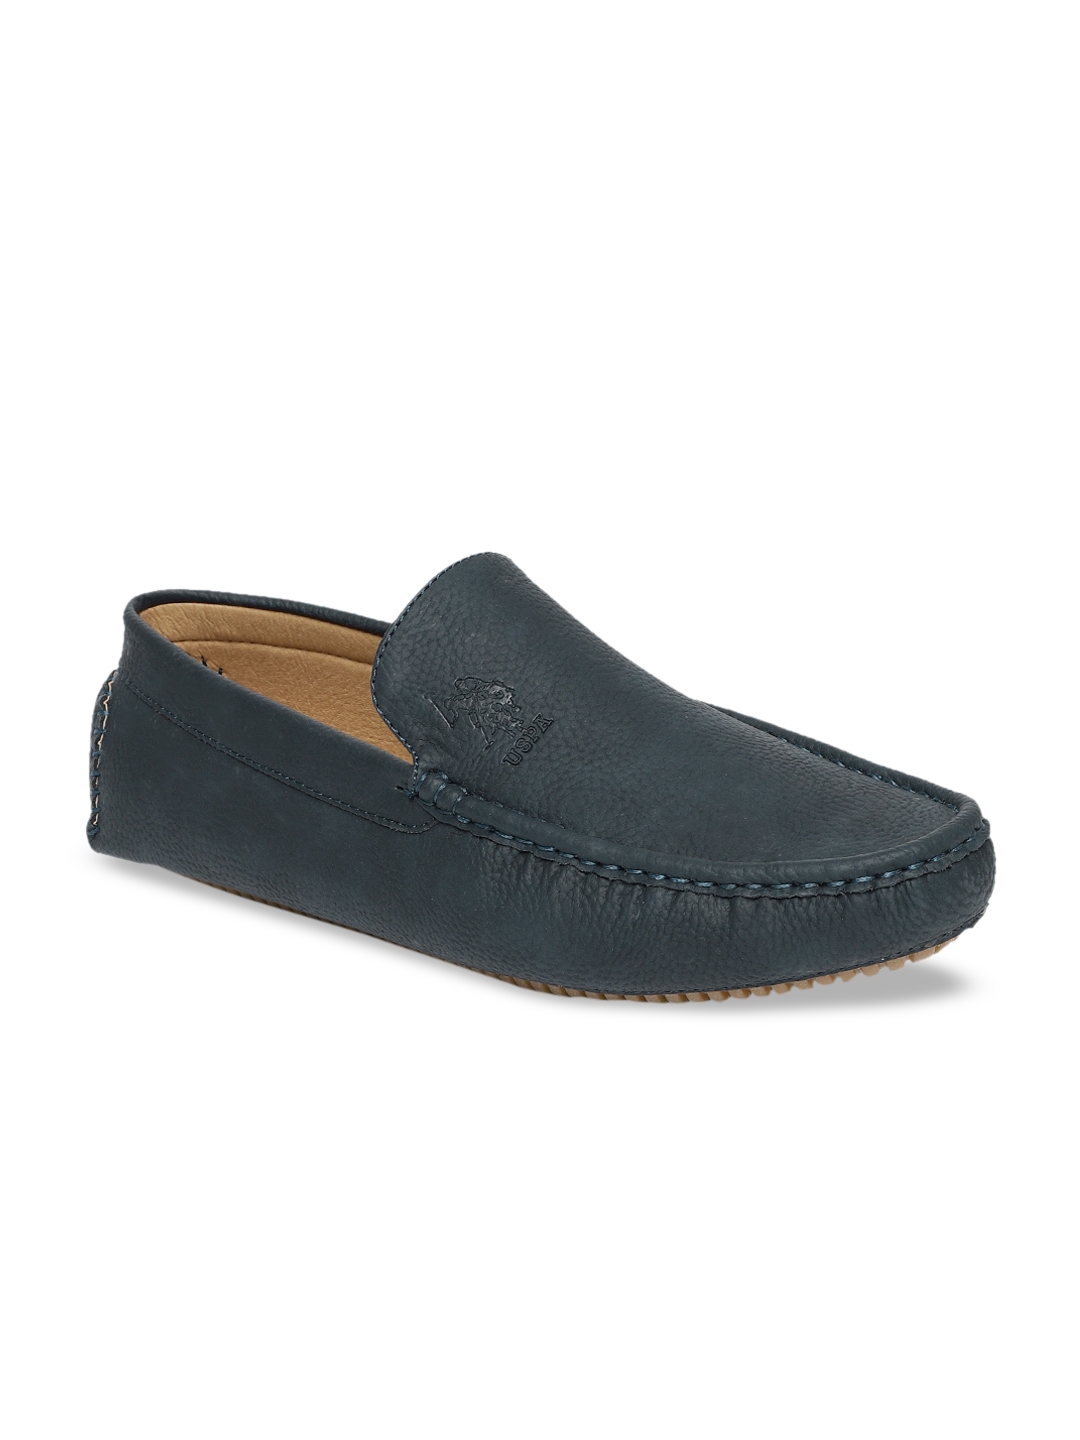 Buy U.S. Polo Assn. Men Navy Blue Loafers - Casual Shoes for Men ...